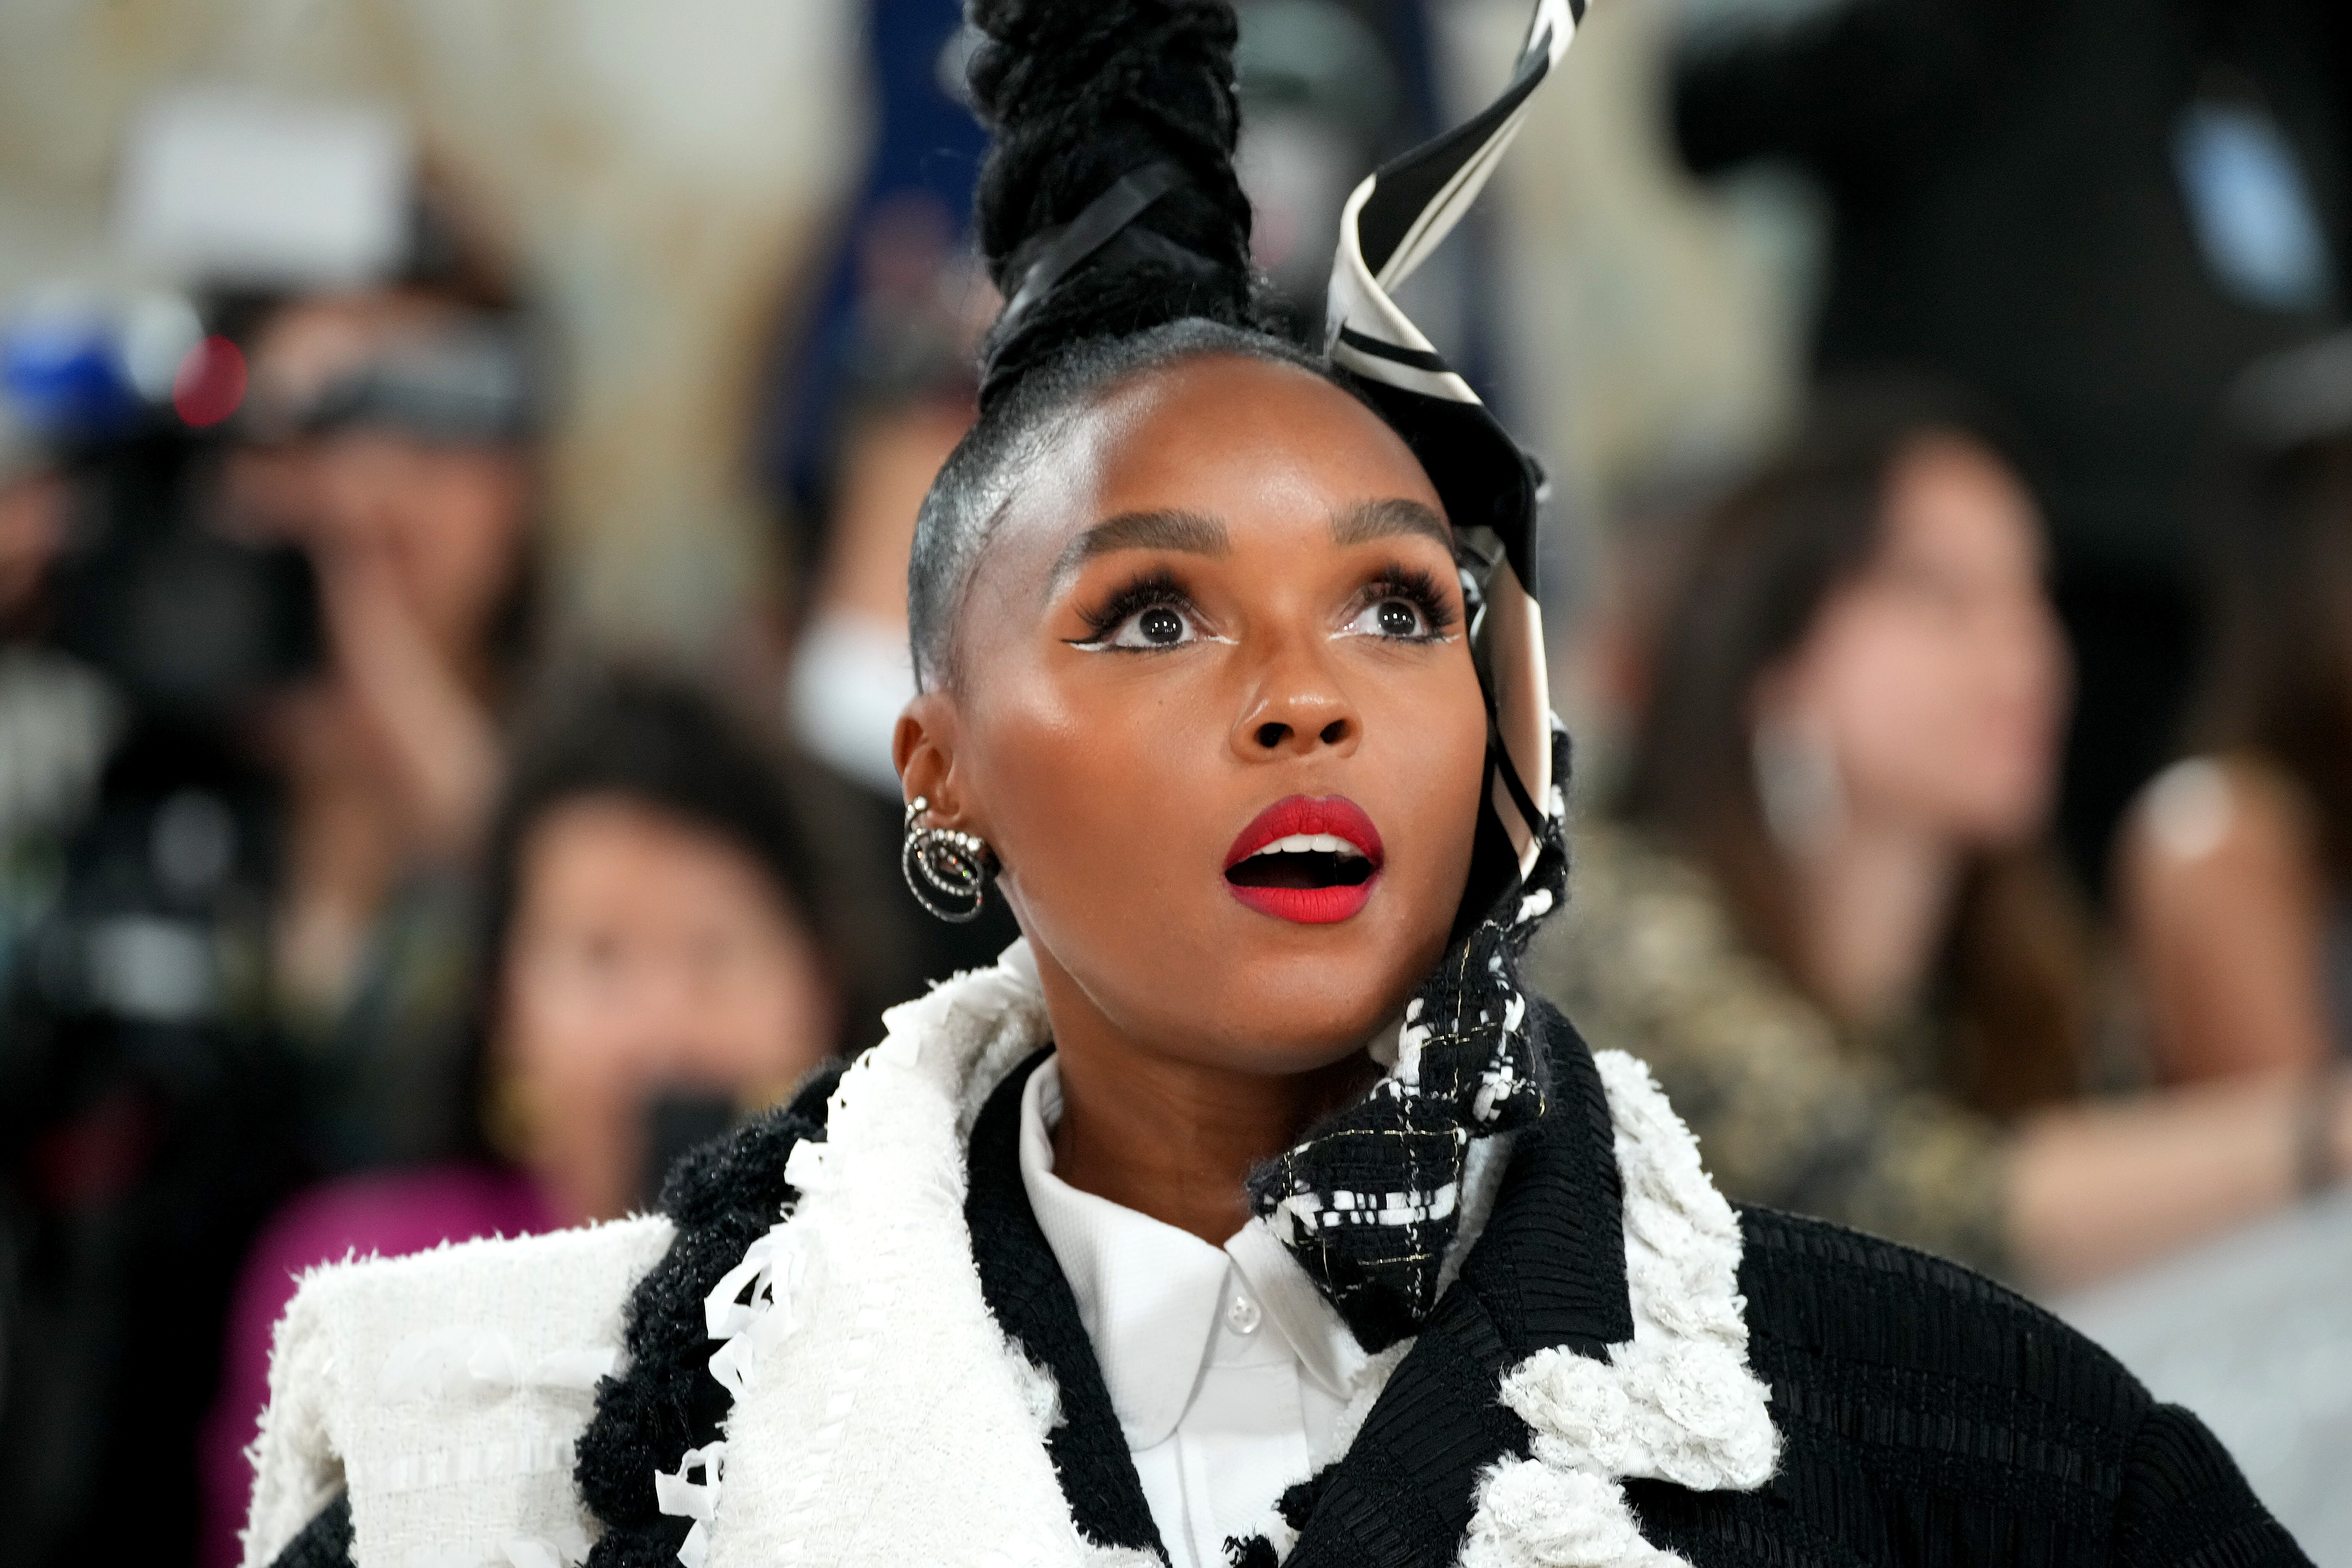 Janelle Monáe’s “The Age Of Pleasure” Vinyl Gives Fans The Most Up-Close View Of Her Breasts Yet